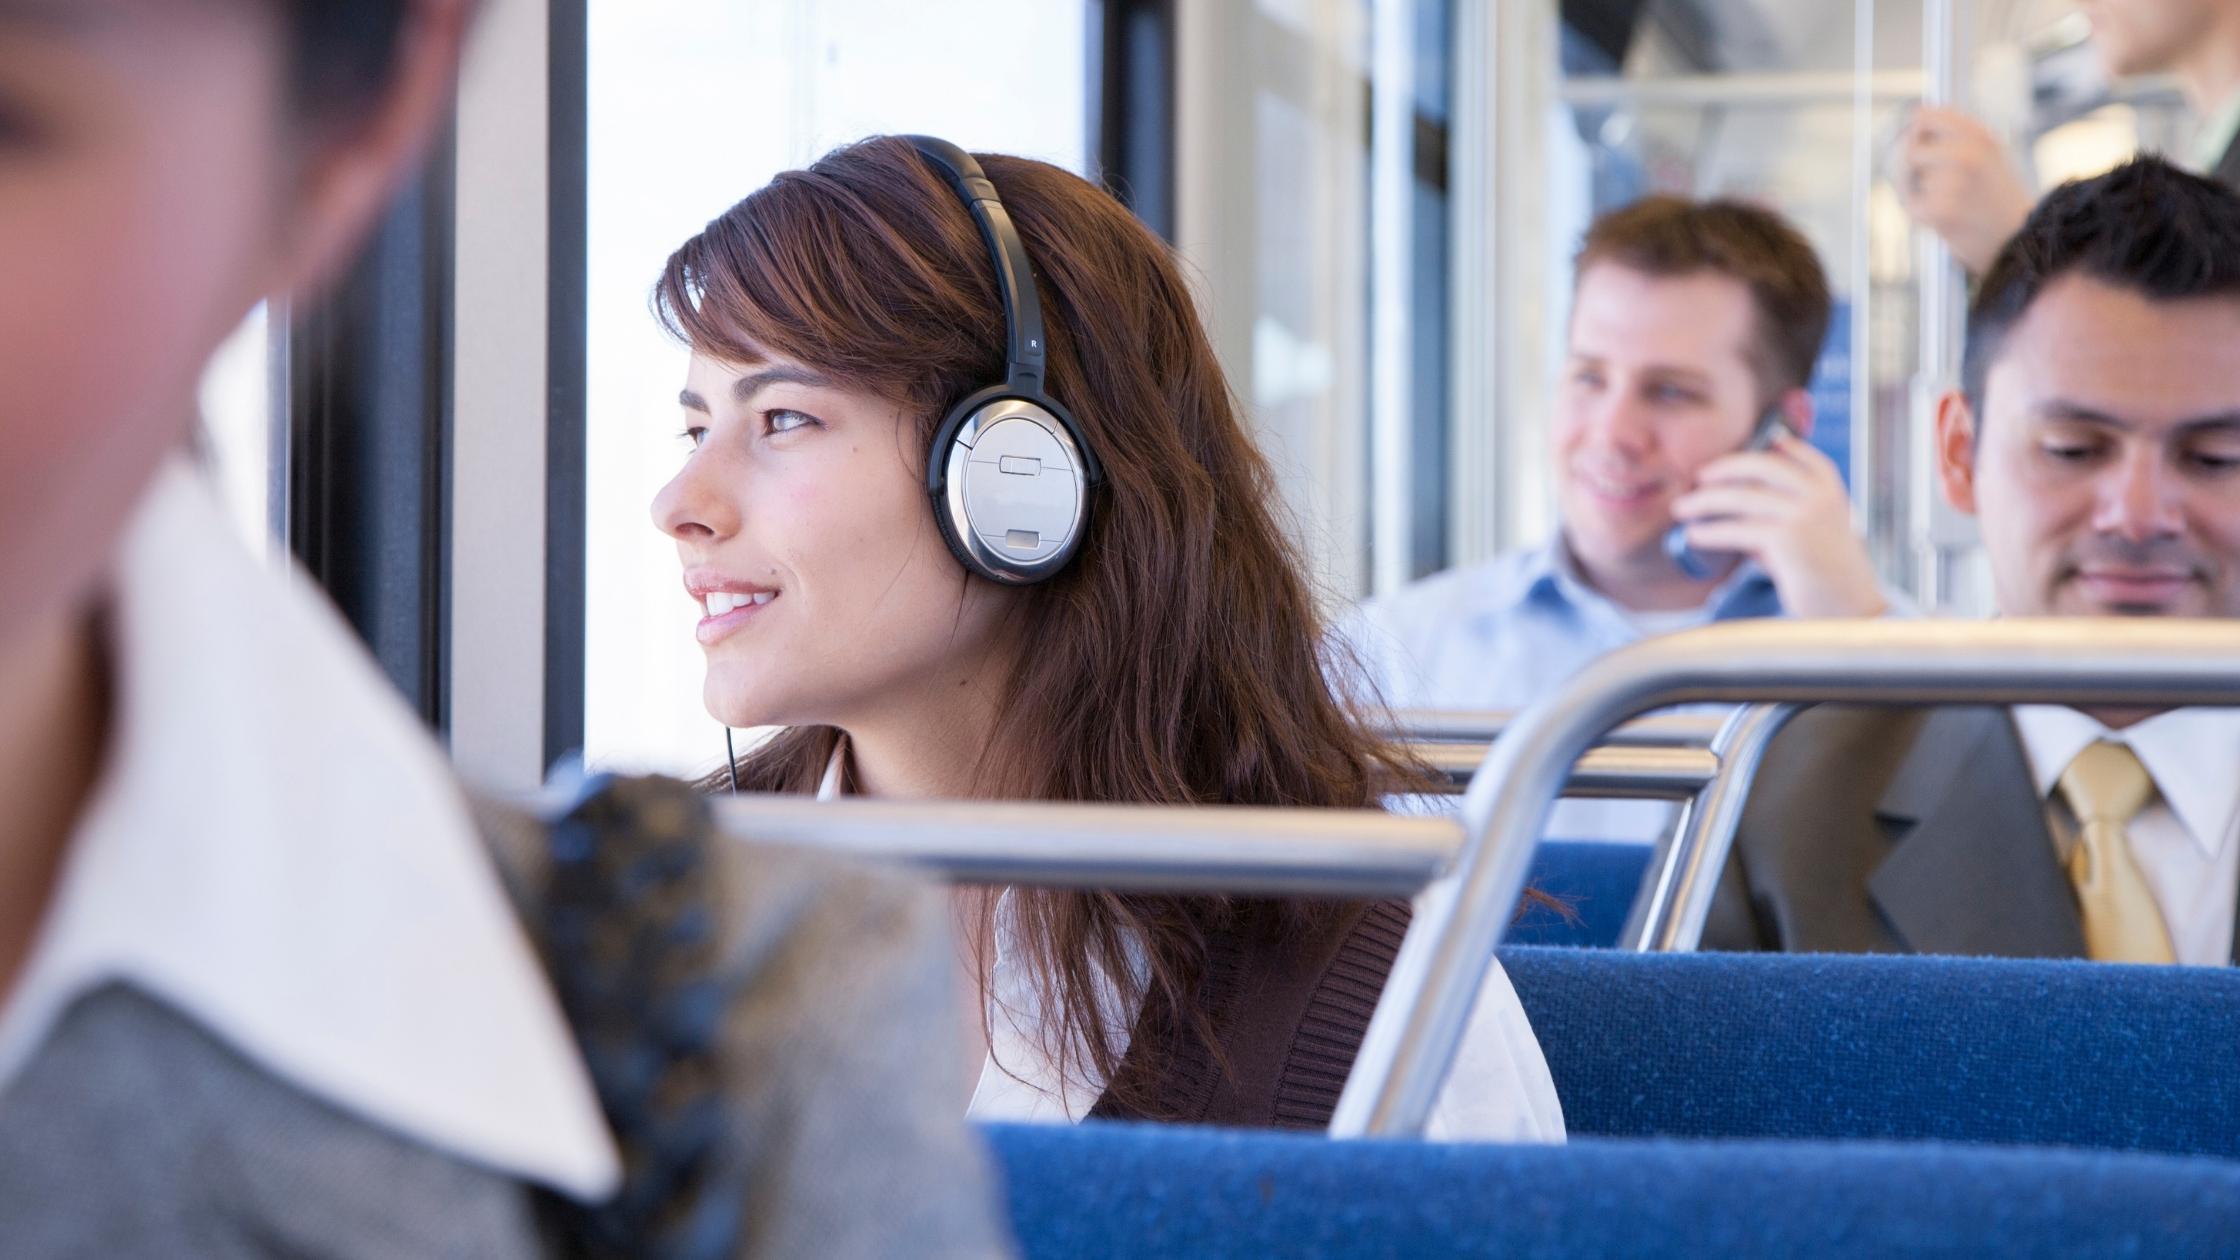 young person wearing headphones on a bus with other commuters